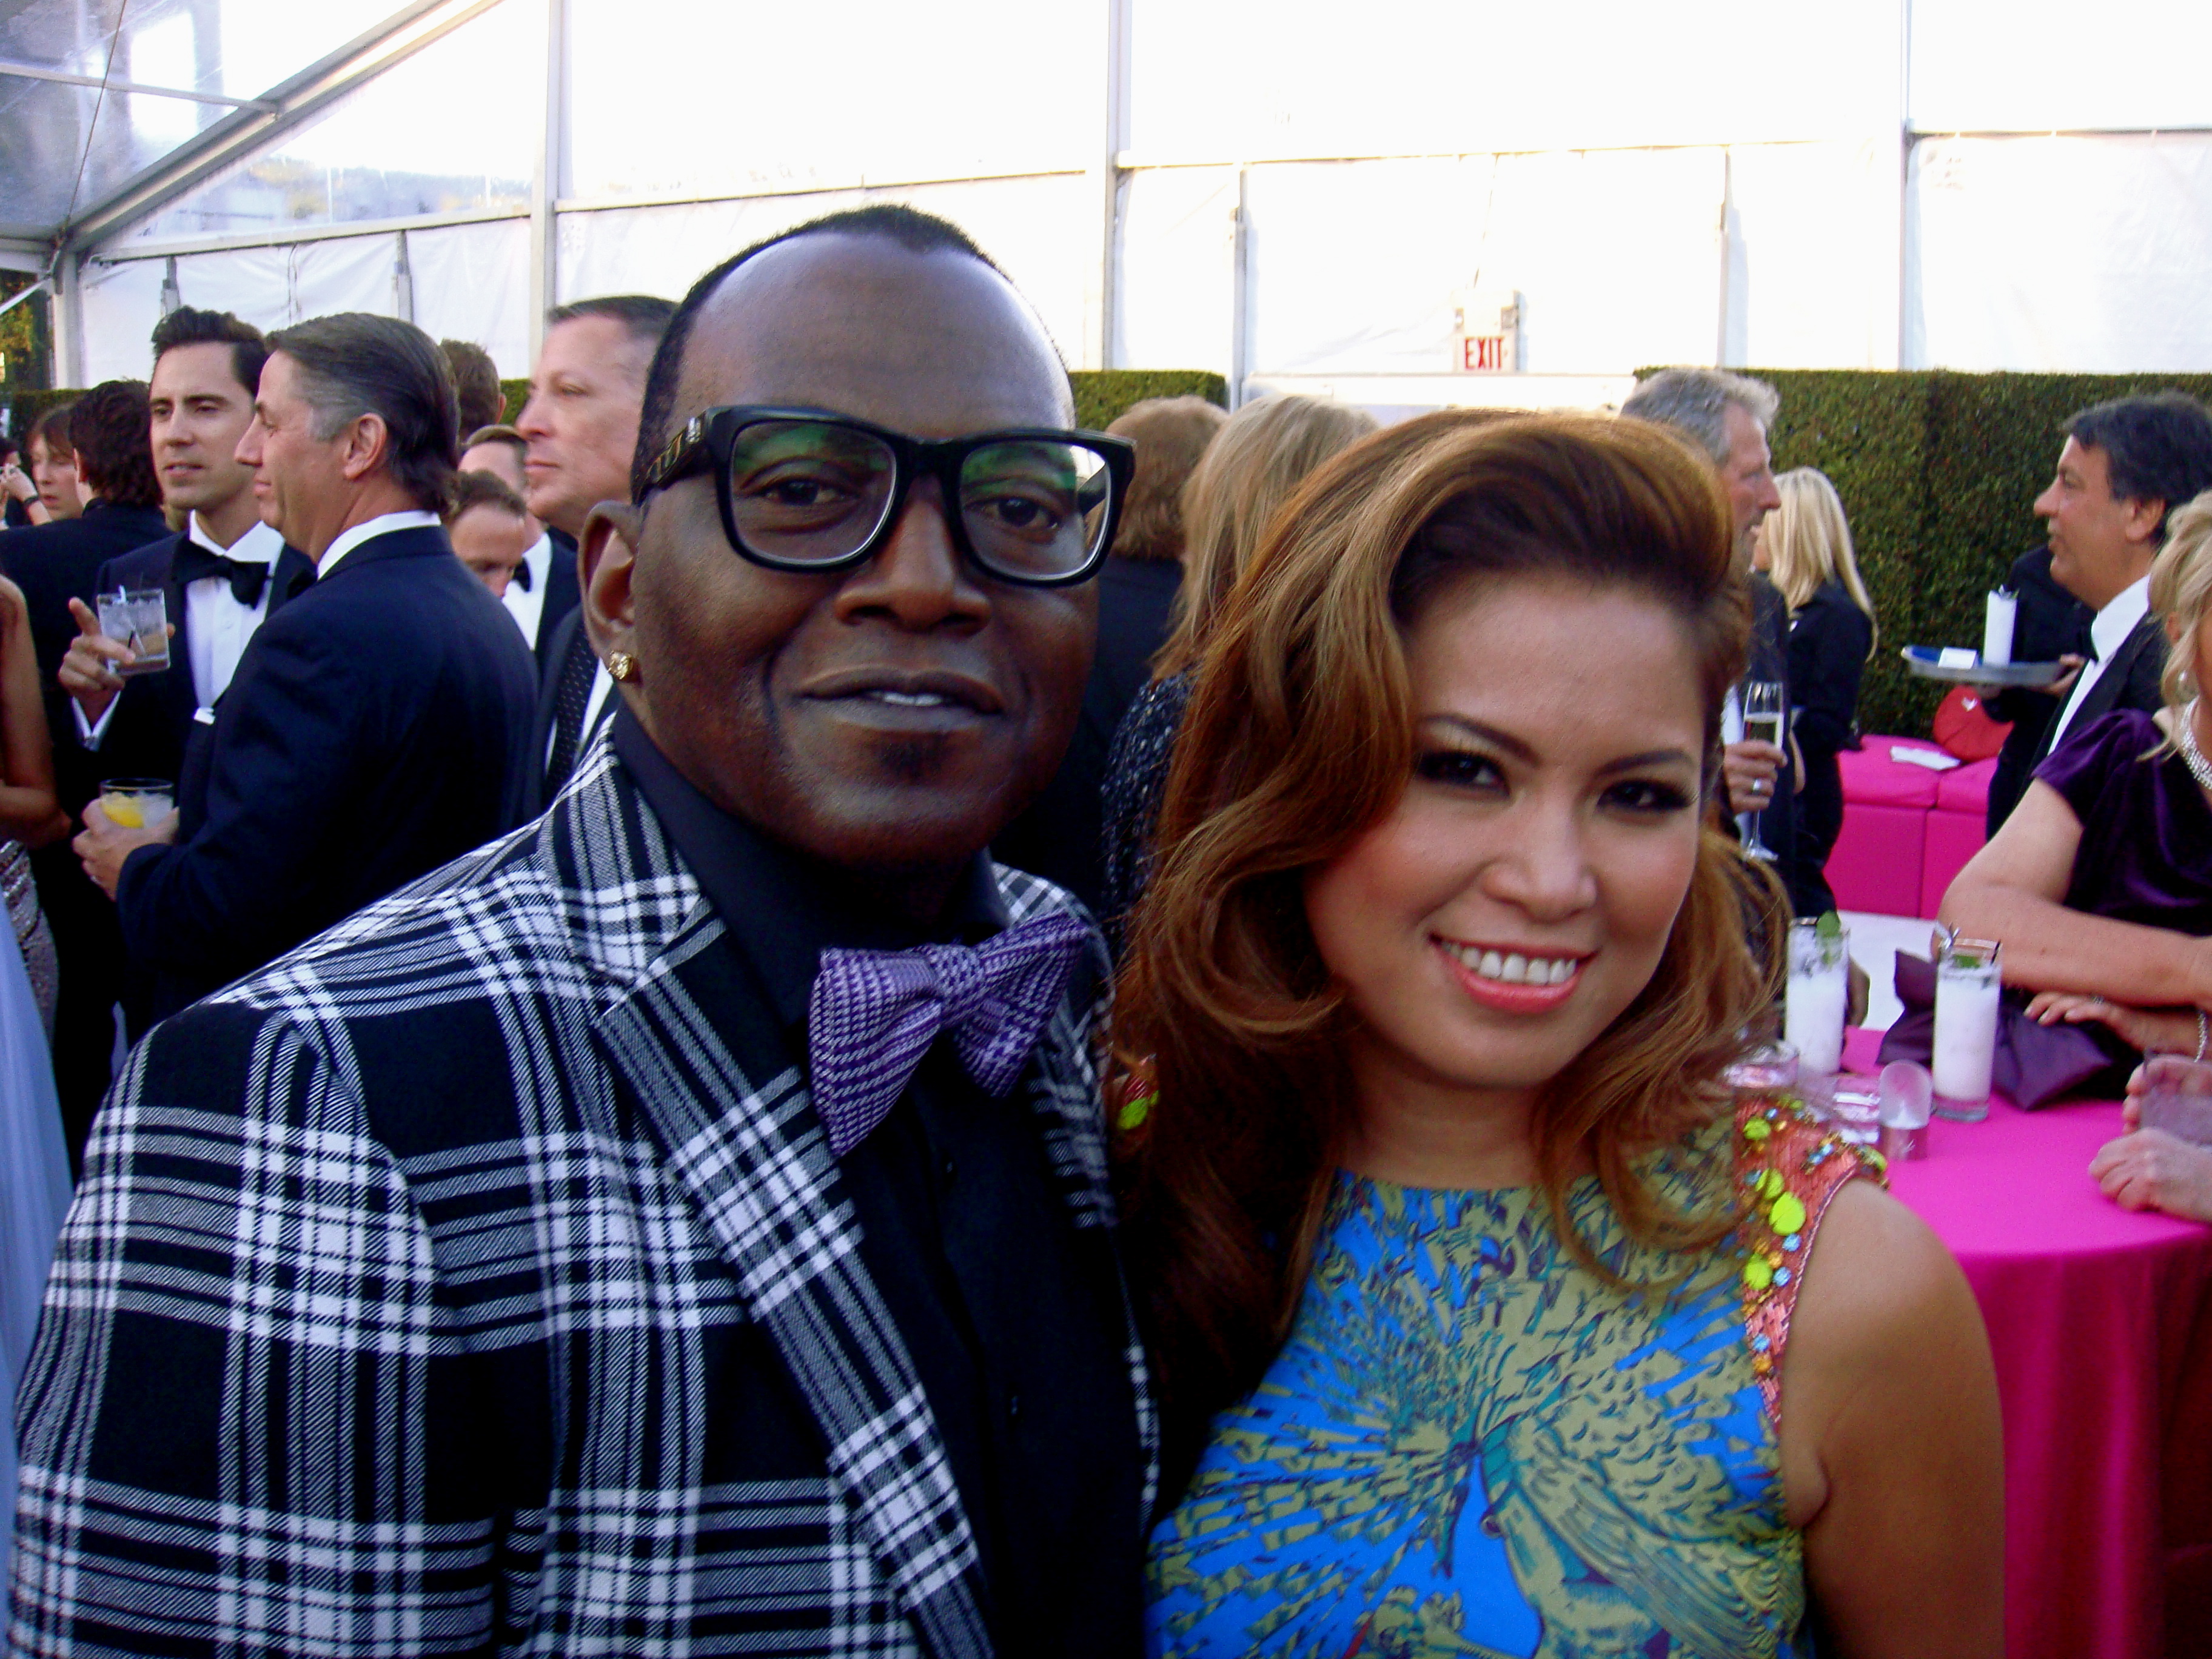 Zarah with American Idol Randy Jackson at the 21st Annual Elton John Oscar Viewing Party February 24, 2013, Los Angeles.